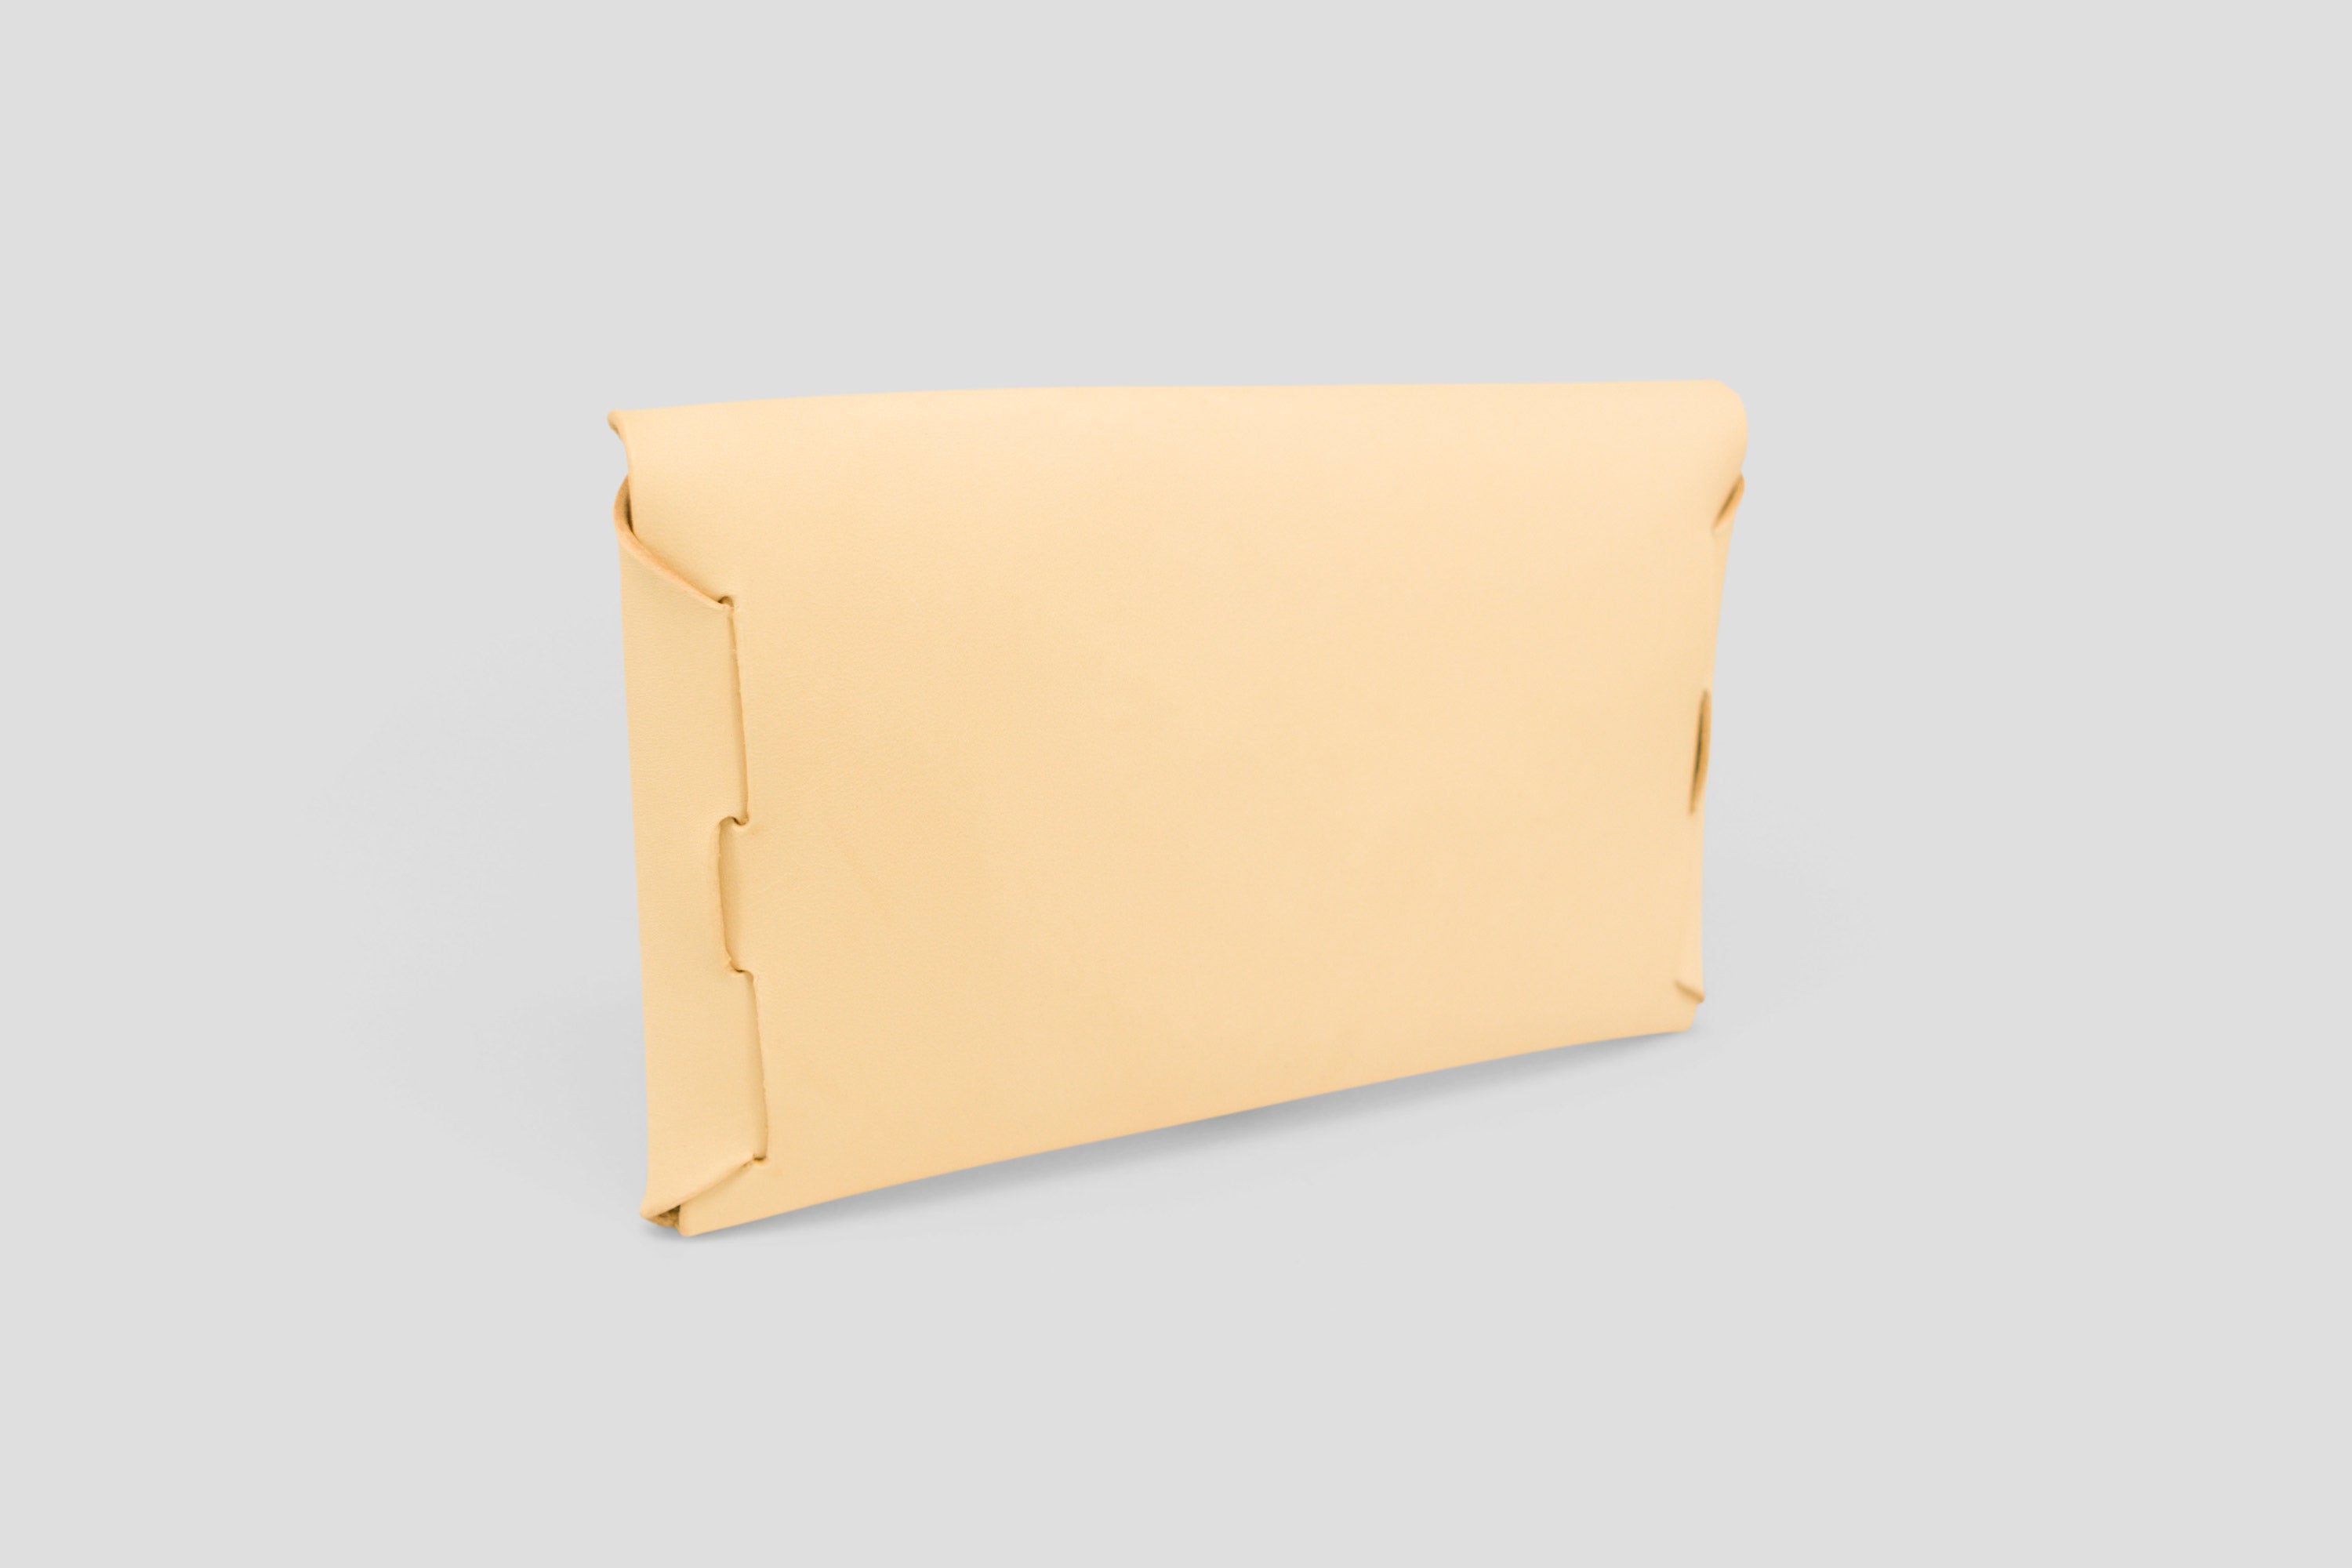 Small leather envelop clutch